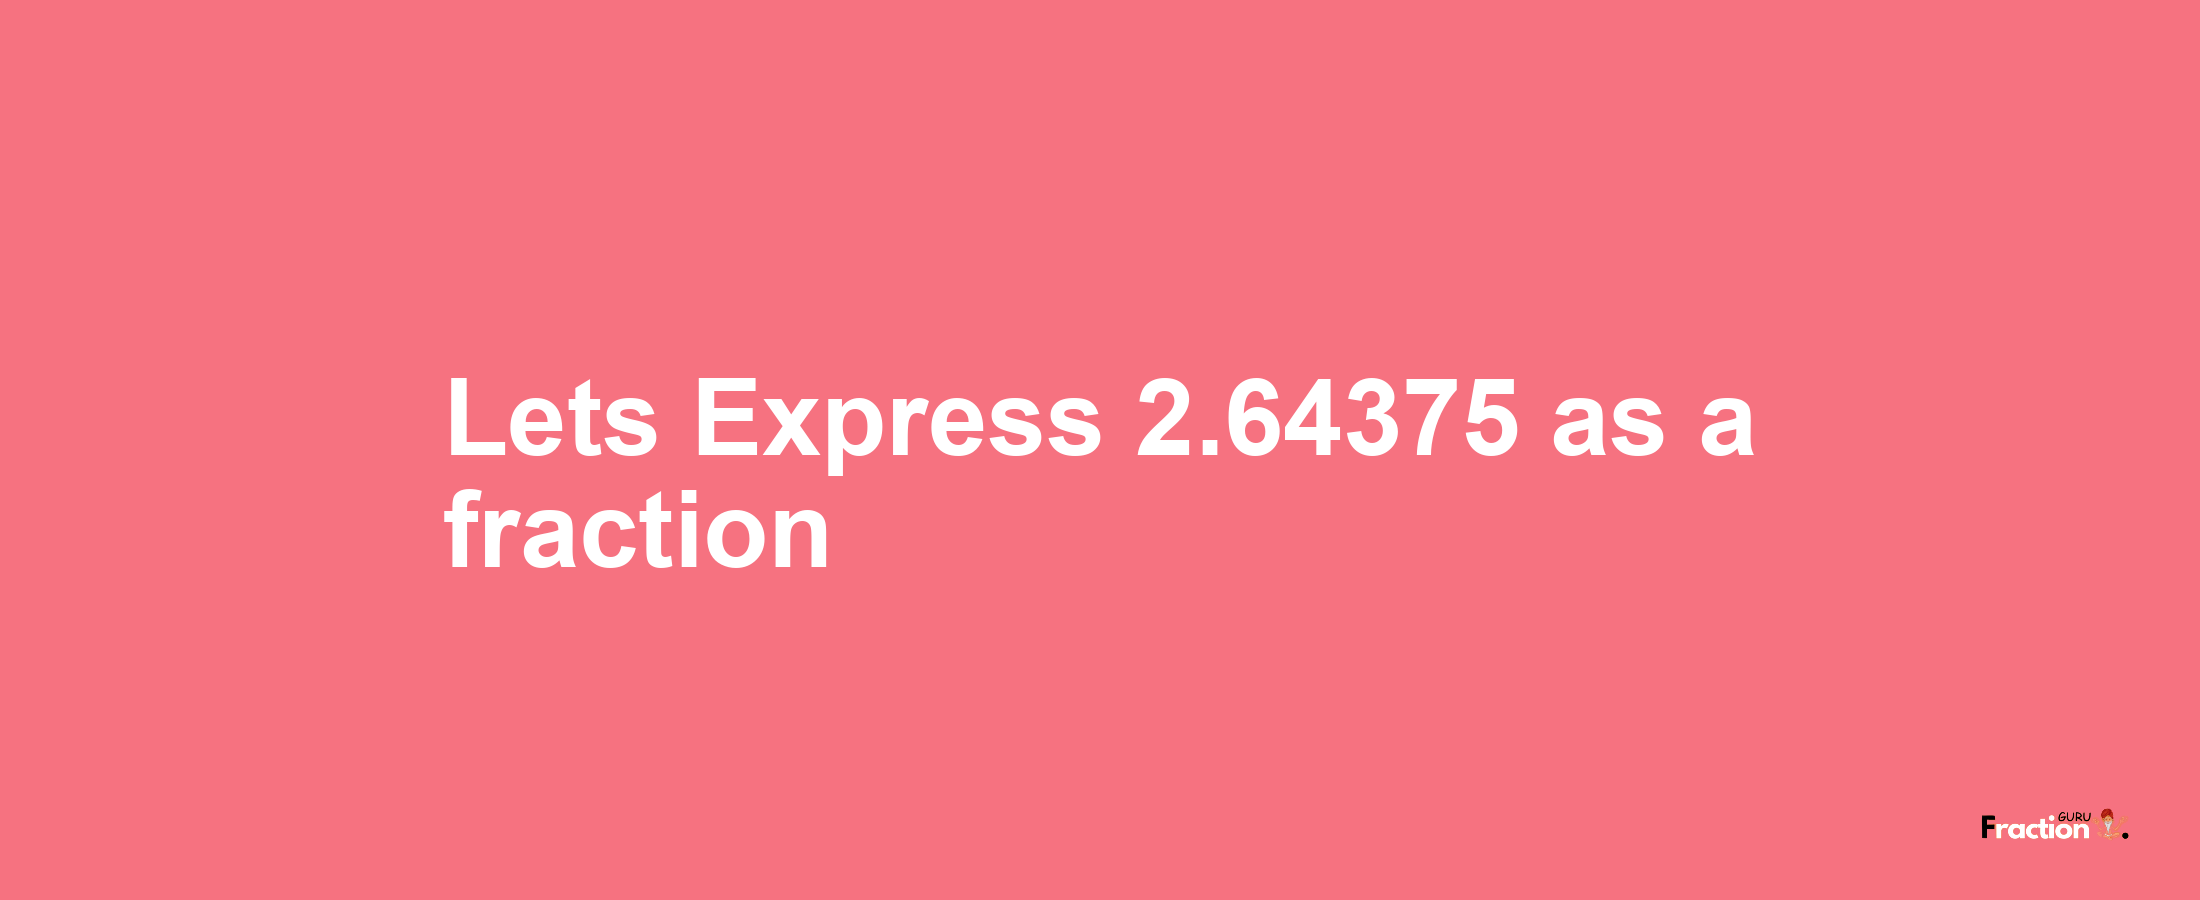 Lets Express 2.64375 as afraction